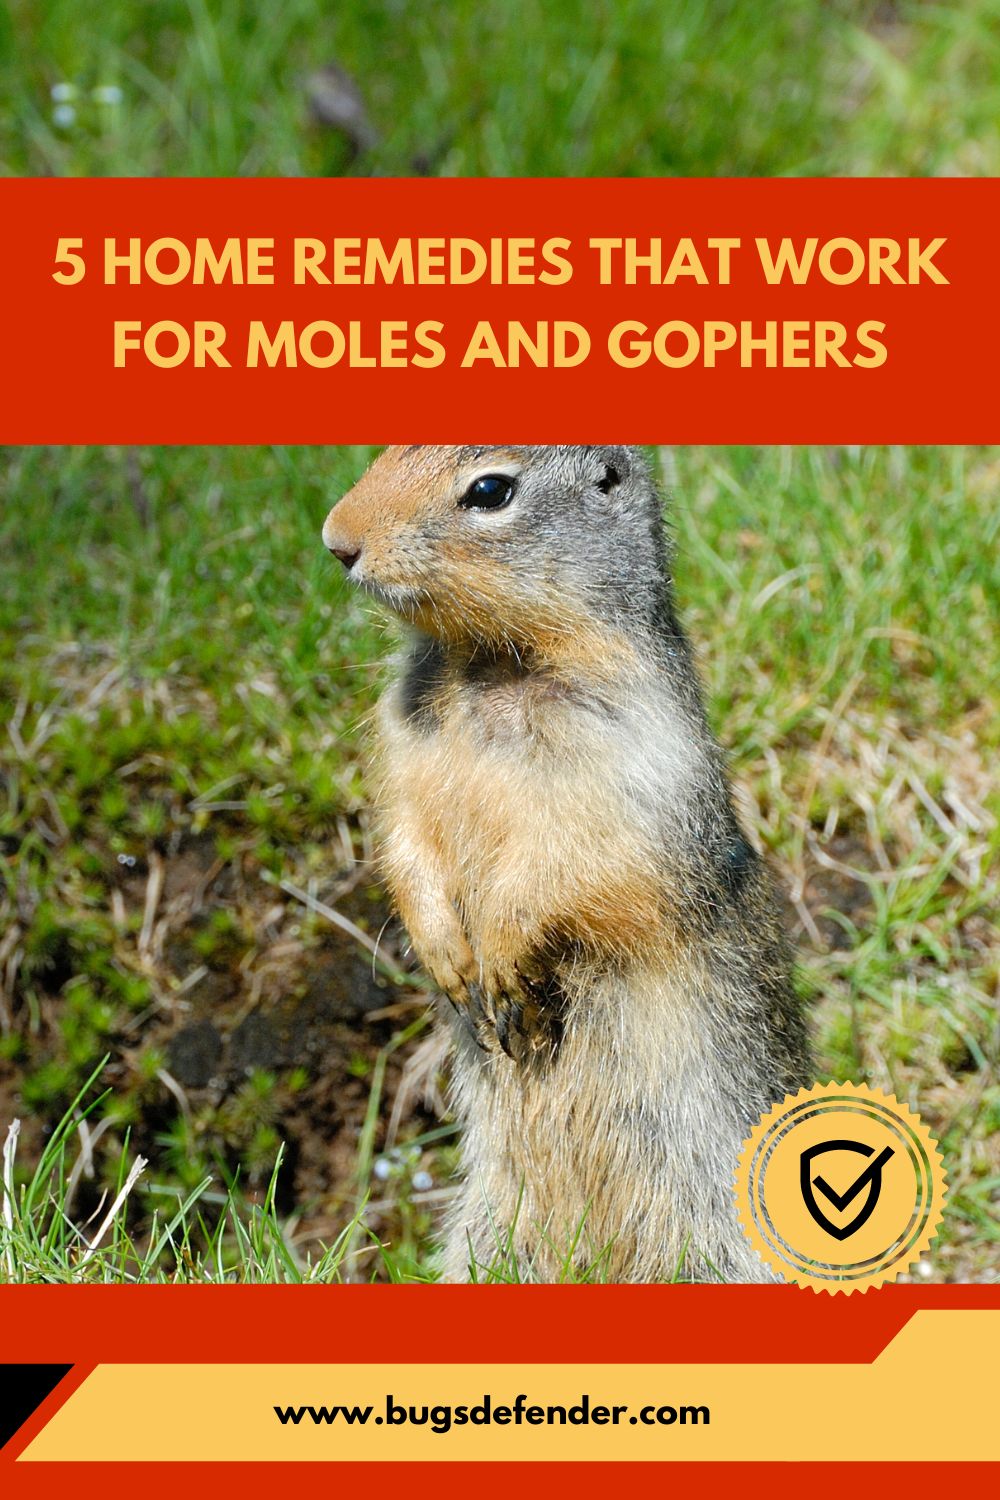 Home Remedies That Work For Moles And Gophers pin1